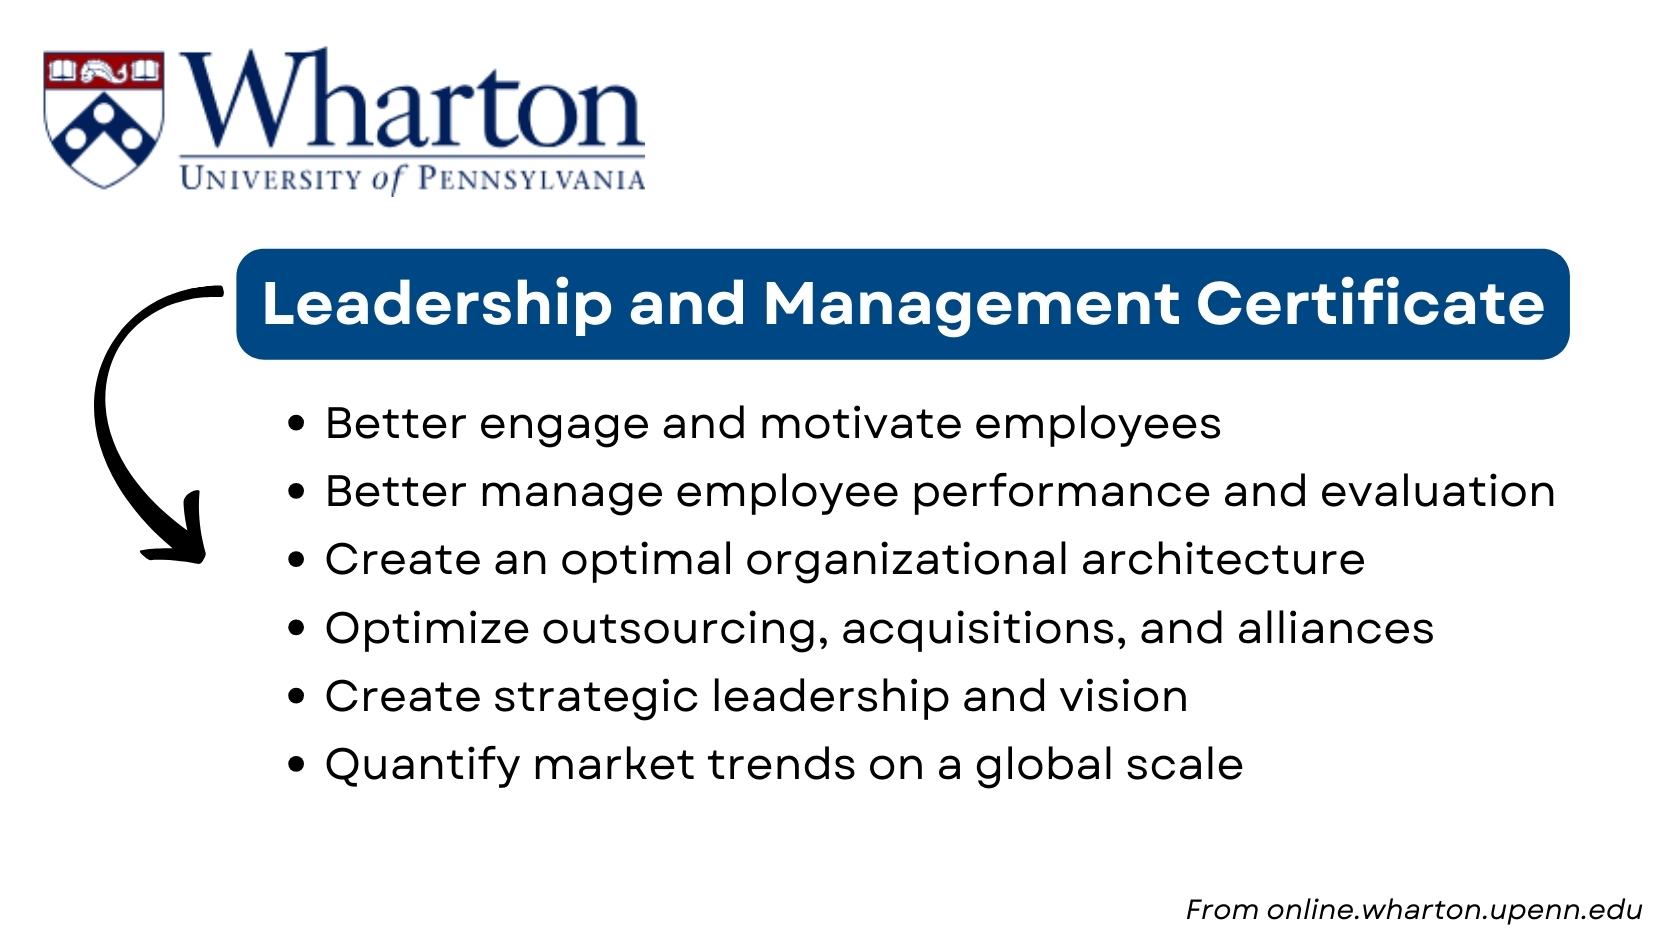 Wharton Leadership and Management Certificate benefits overview.